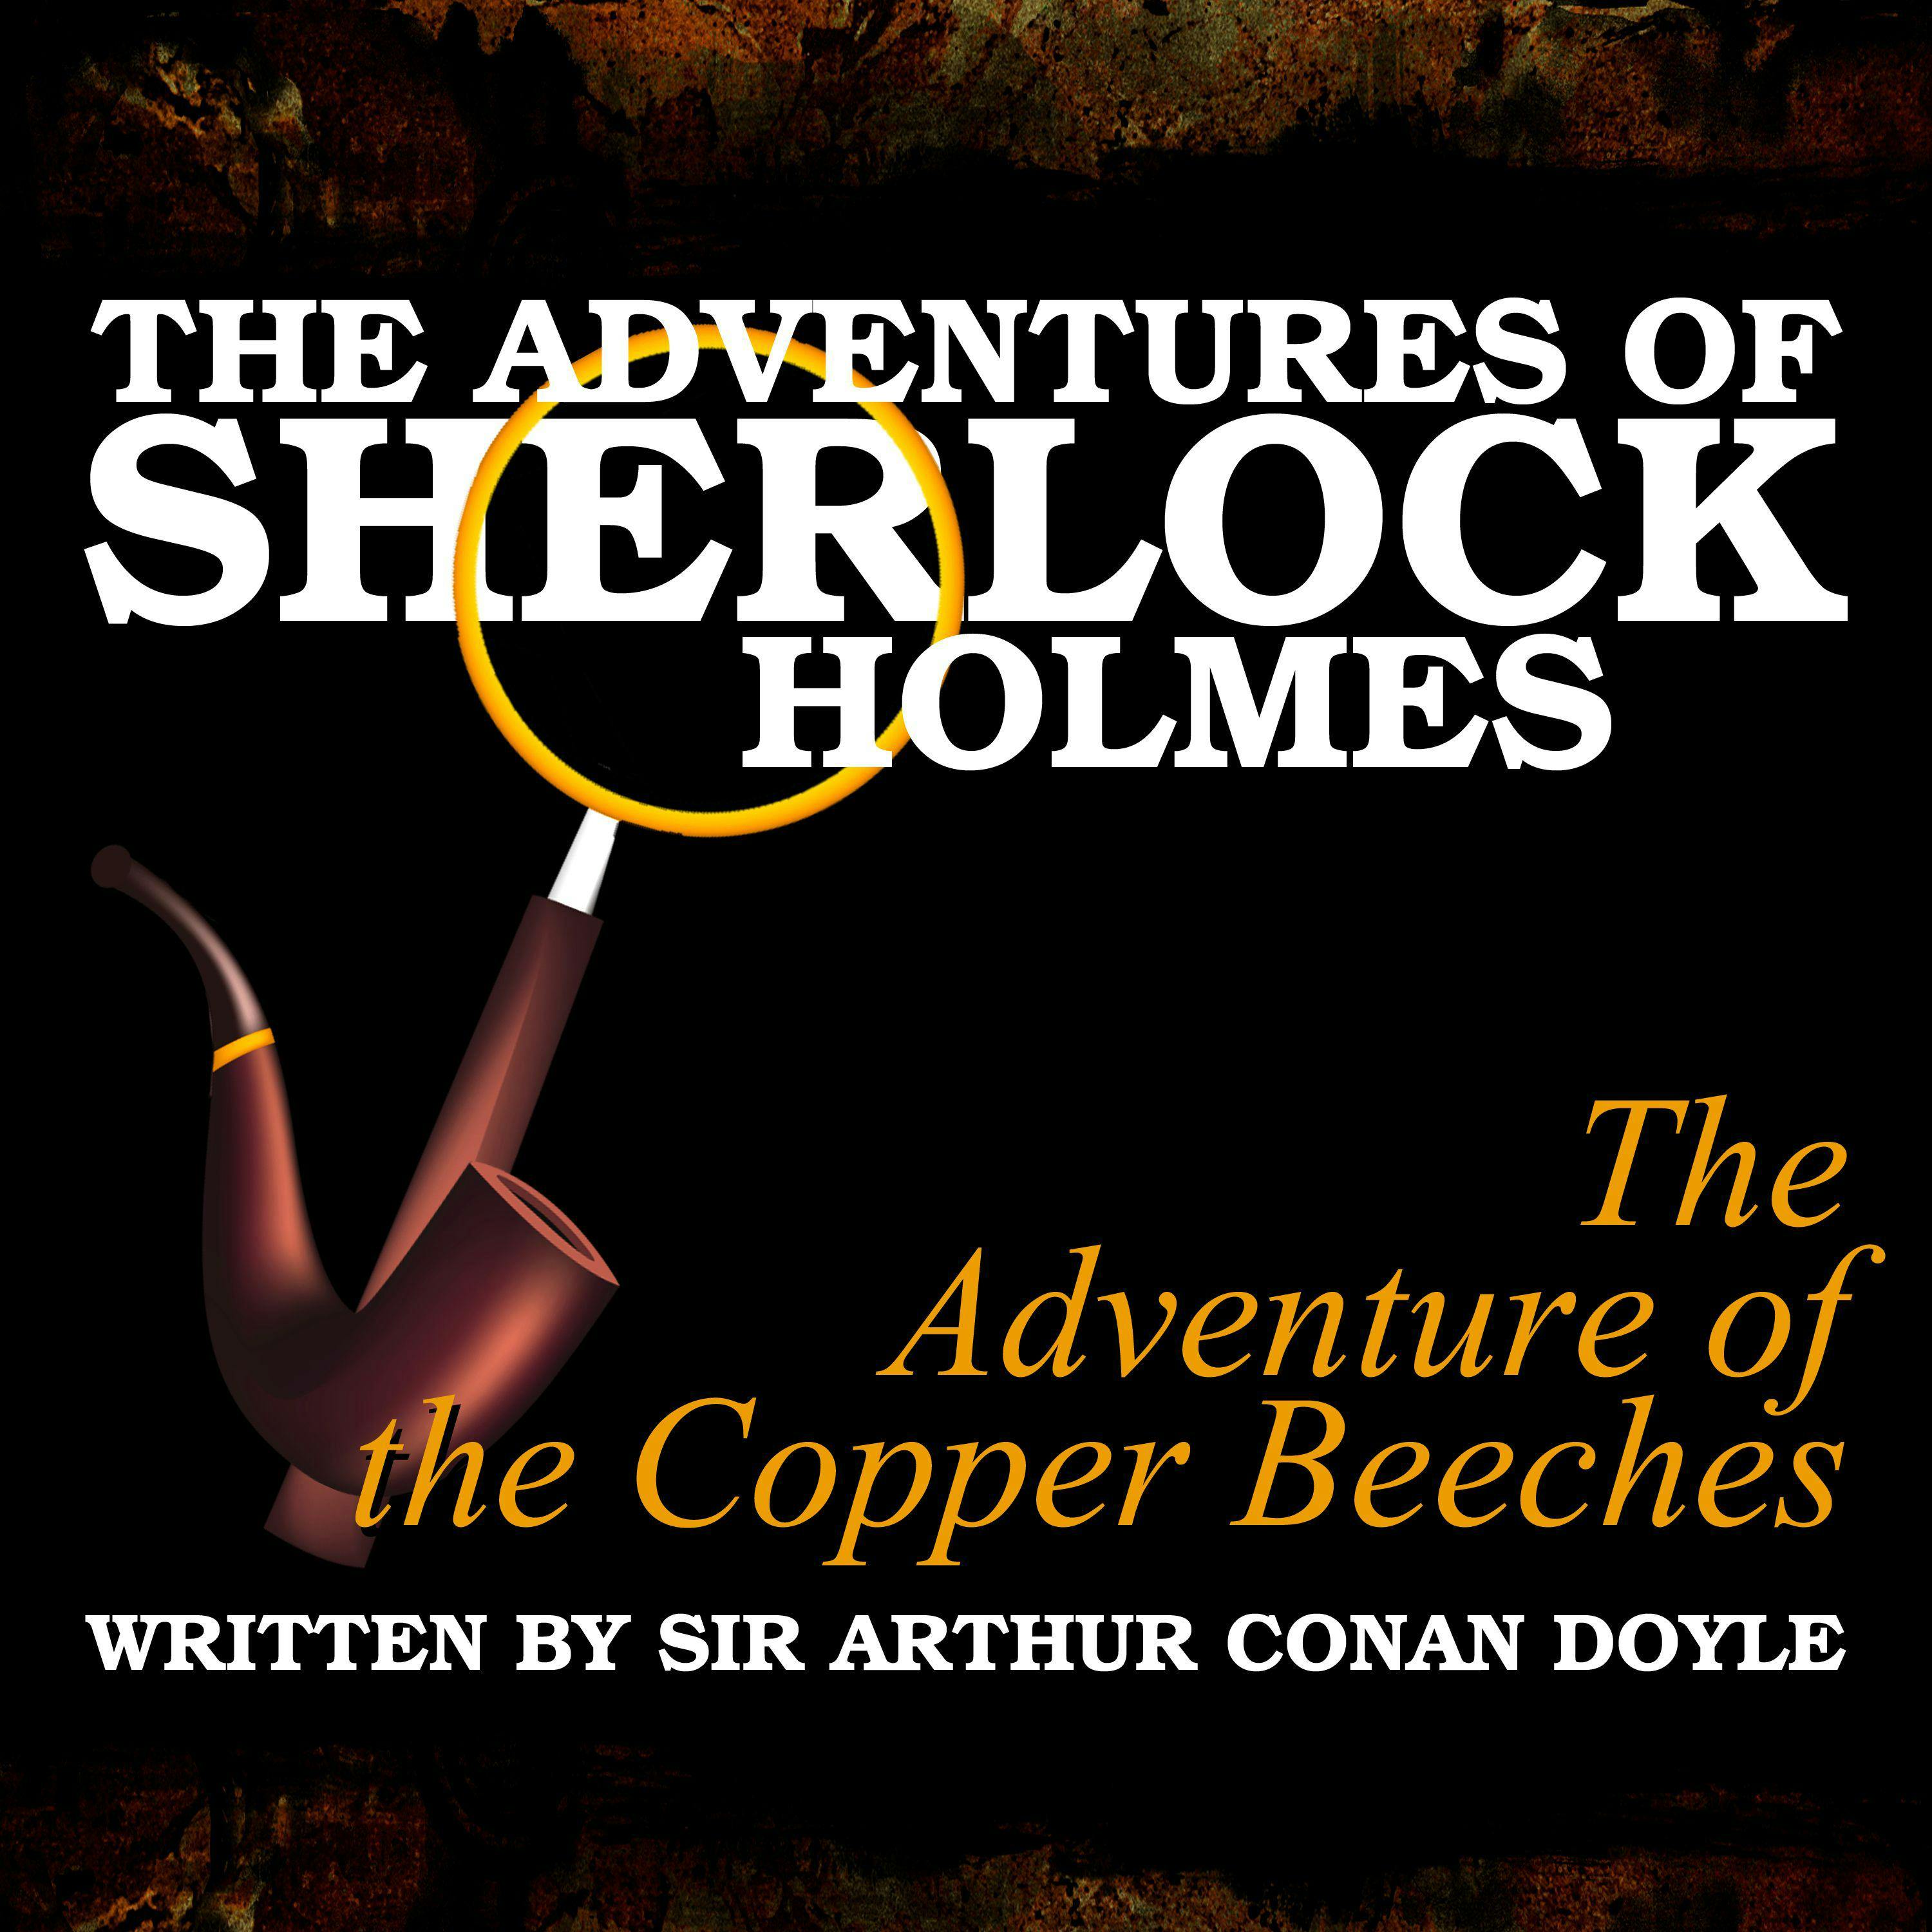 The Adventures of Sherlock Holmes: The Adventure of the Copper Beeches - undefined